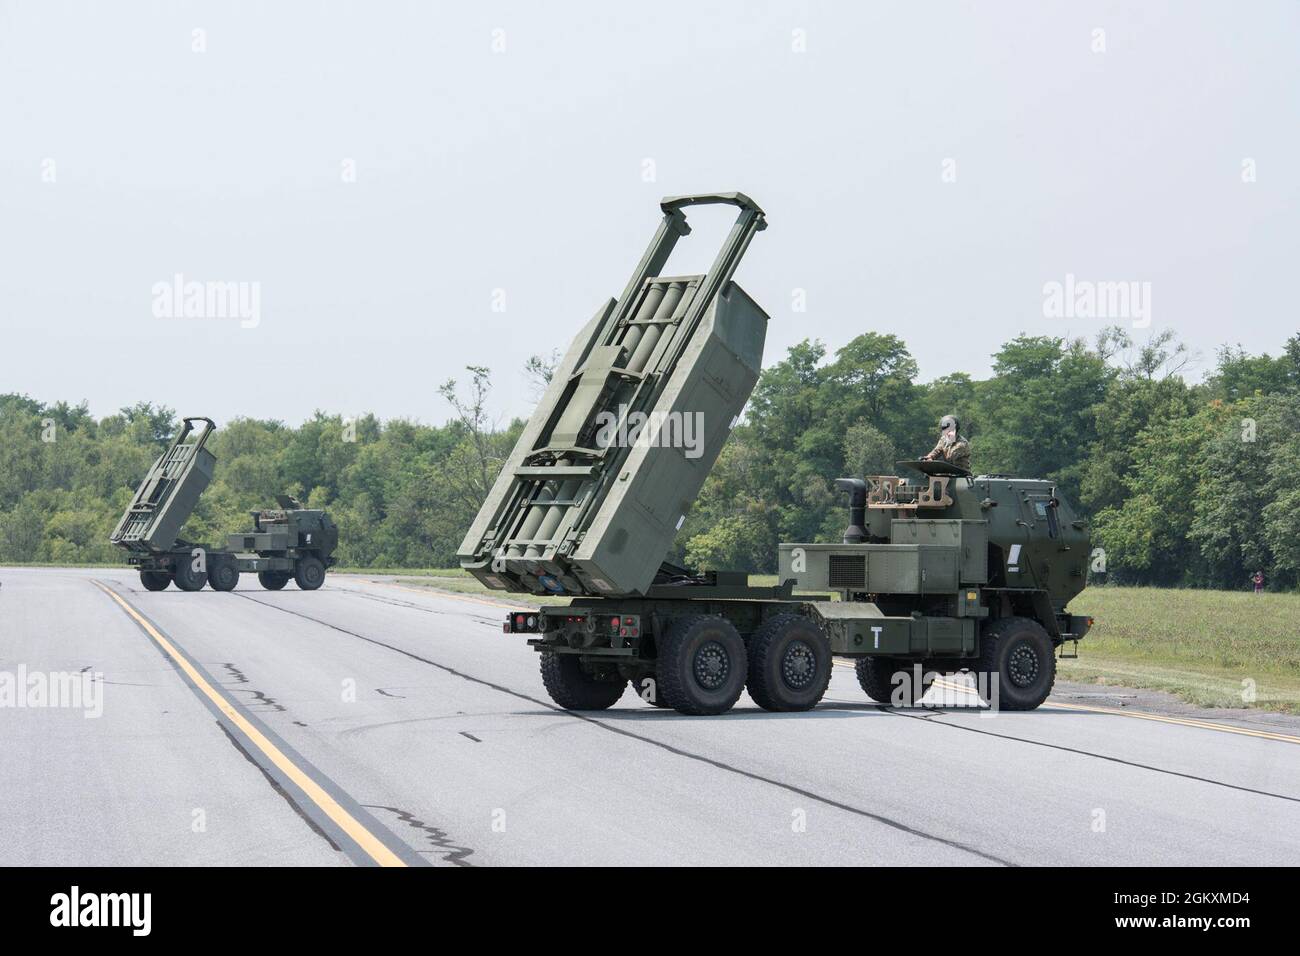 U.S. Army High Mobility Artillery Rocket System (HIMARS) vehicles with B Battery, 1st Battalion, 623rd Field Artillery Regiment, Kentucky National Guard, conduct a simulated firing exercise on the airfield at Shepherd Field Air National Guard Base, Martinsburg, West Virginia, July 20, 2021, as part of Sentry Storm 2021. Sentry Storm, a joint training exercise hosted by the West Virginia Air National Guard, focuses on Agile Combat Employment (ACE) concepts allowing participants to hone skills needed to prevail over near-peer competitors. A variety of aircraft including C-130 Hercules, C-17 Glob Stock Photo